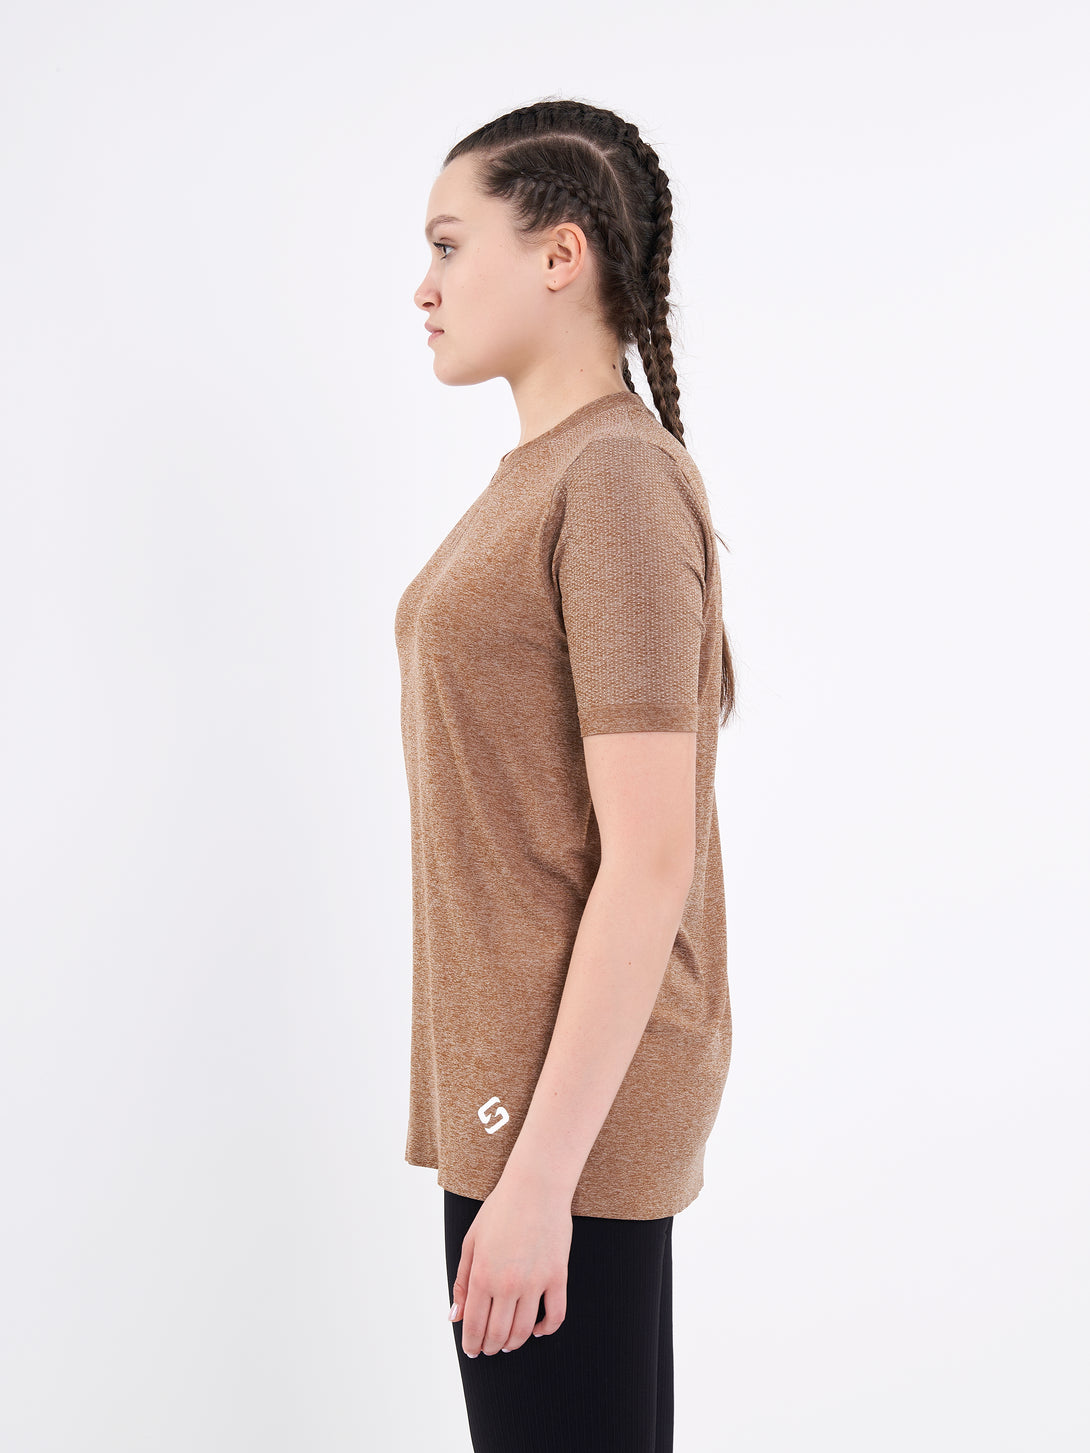 A Woman Wearing Toffe Brown Color Unisex Seamless Melange T-Shirt. Enhanced Comfort